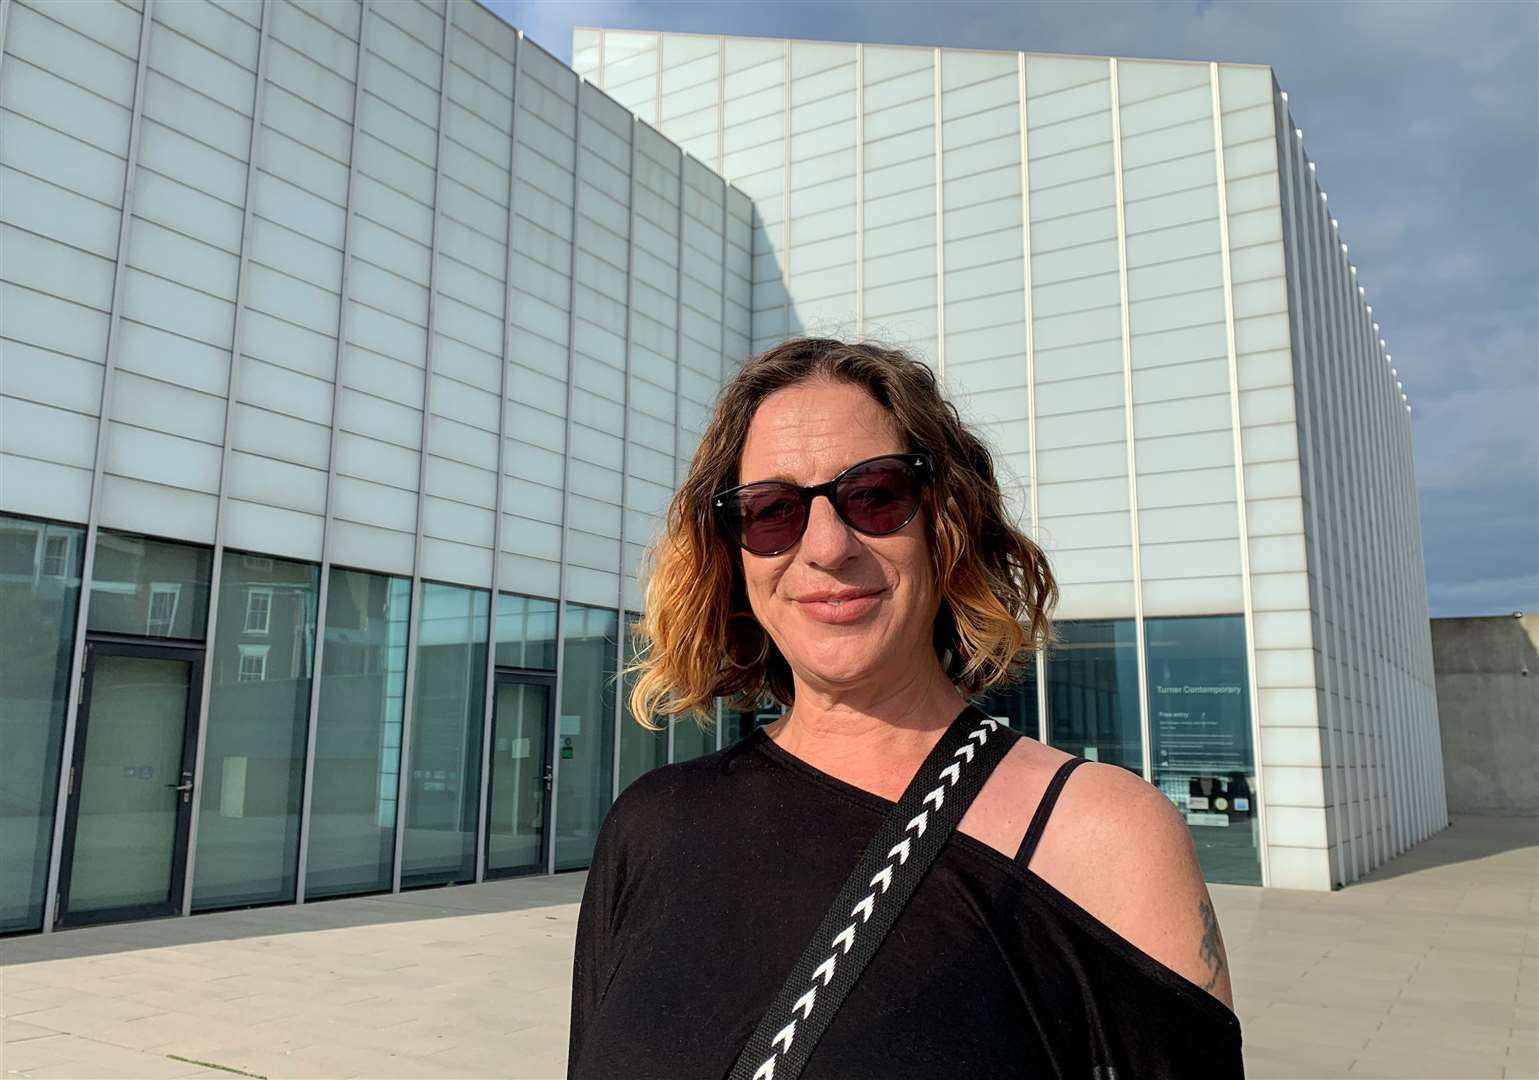 Natalie Marsh believes it is important entry to the Turner Contemporary remains free